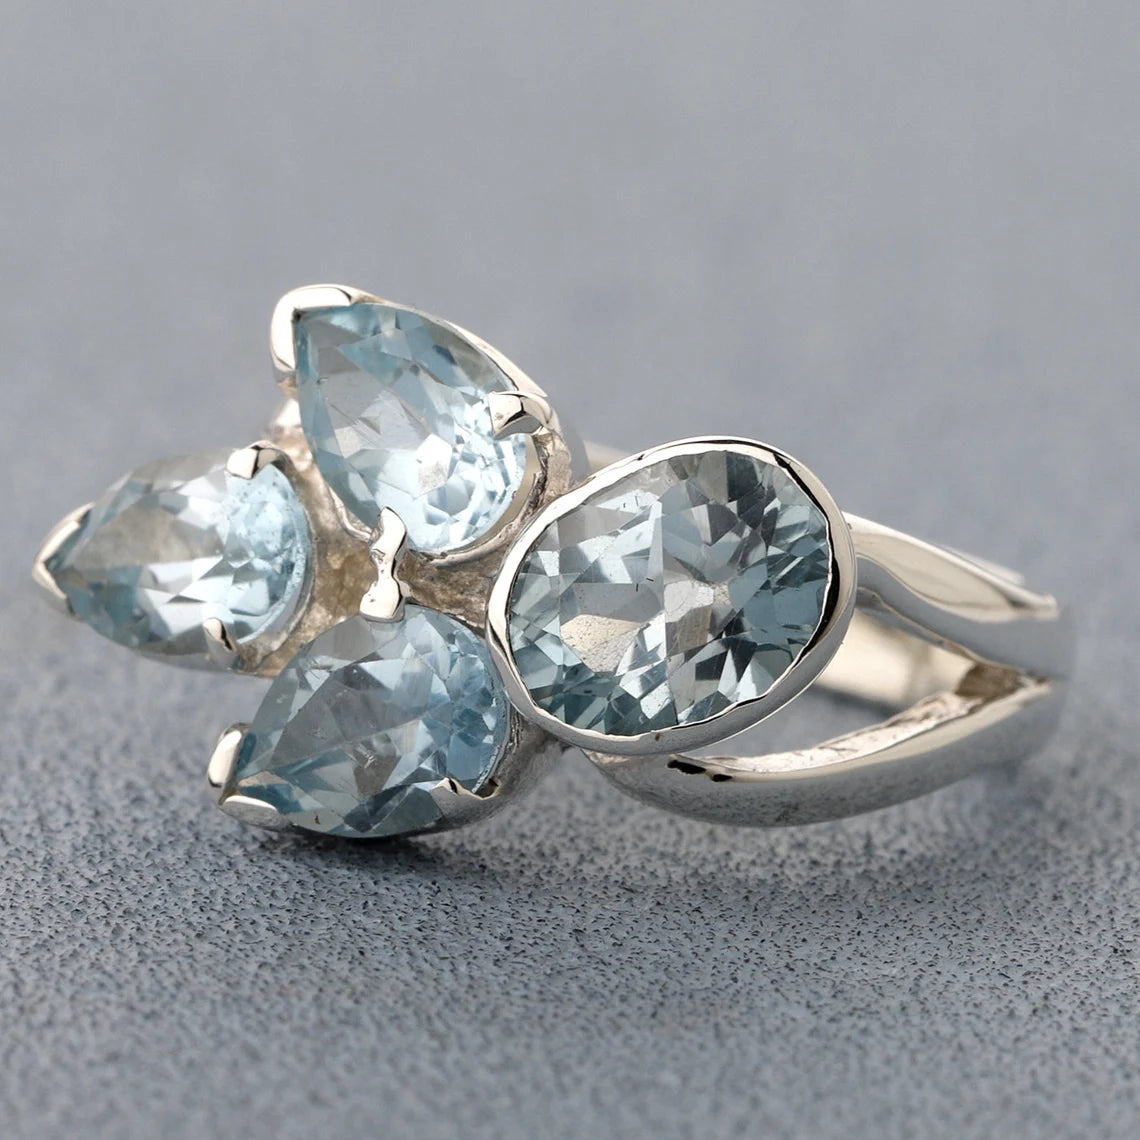 Blue Topaz ring,solid 925 sterling silver ring,Promise Ring,Gift For Girl Friend,